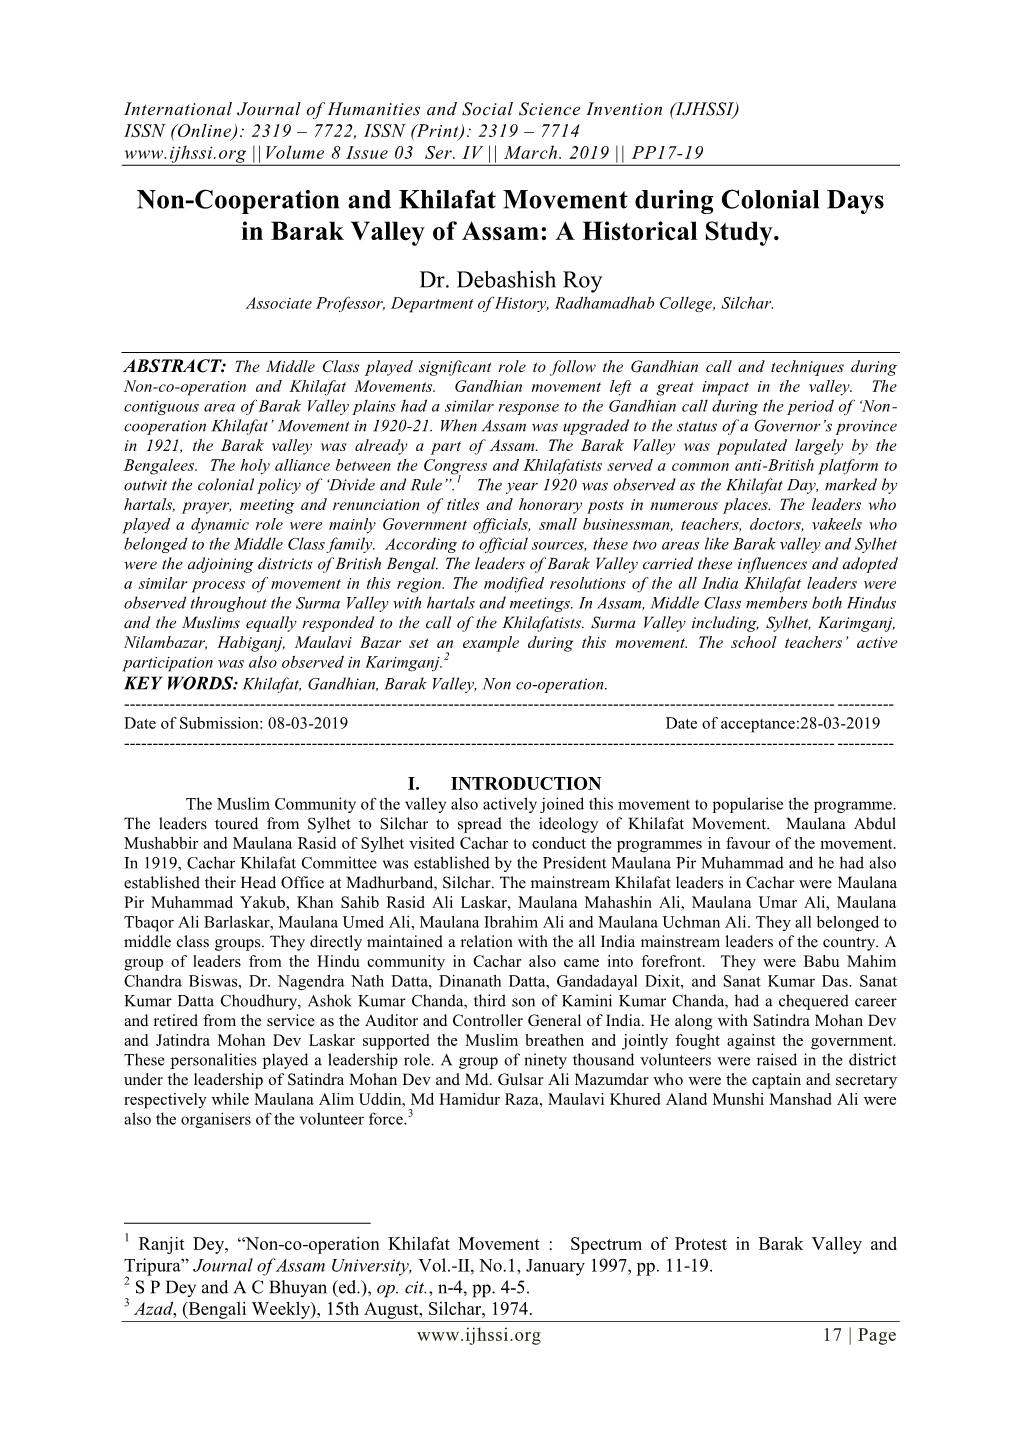 Non-Cooperation and Khilafat Movement During Colonial Days in Barak Valley of Assam: a Historical Study